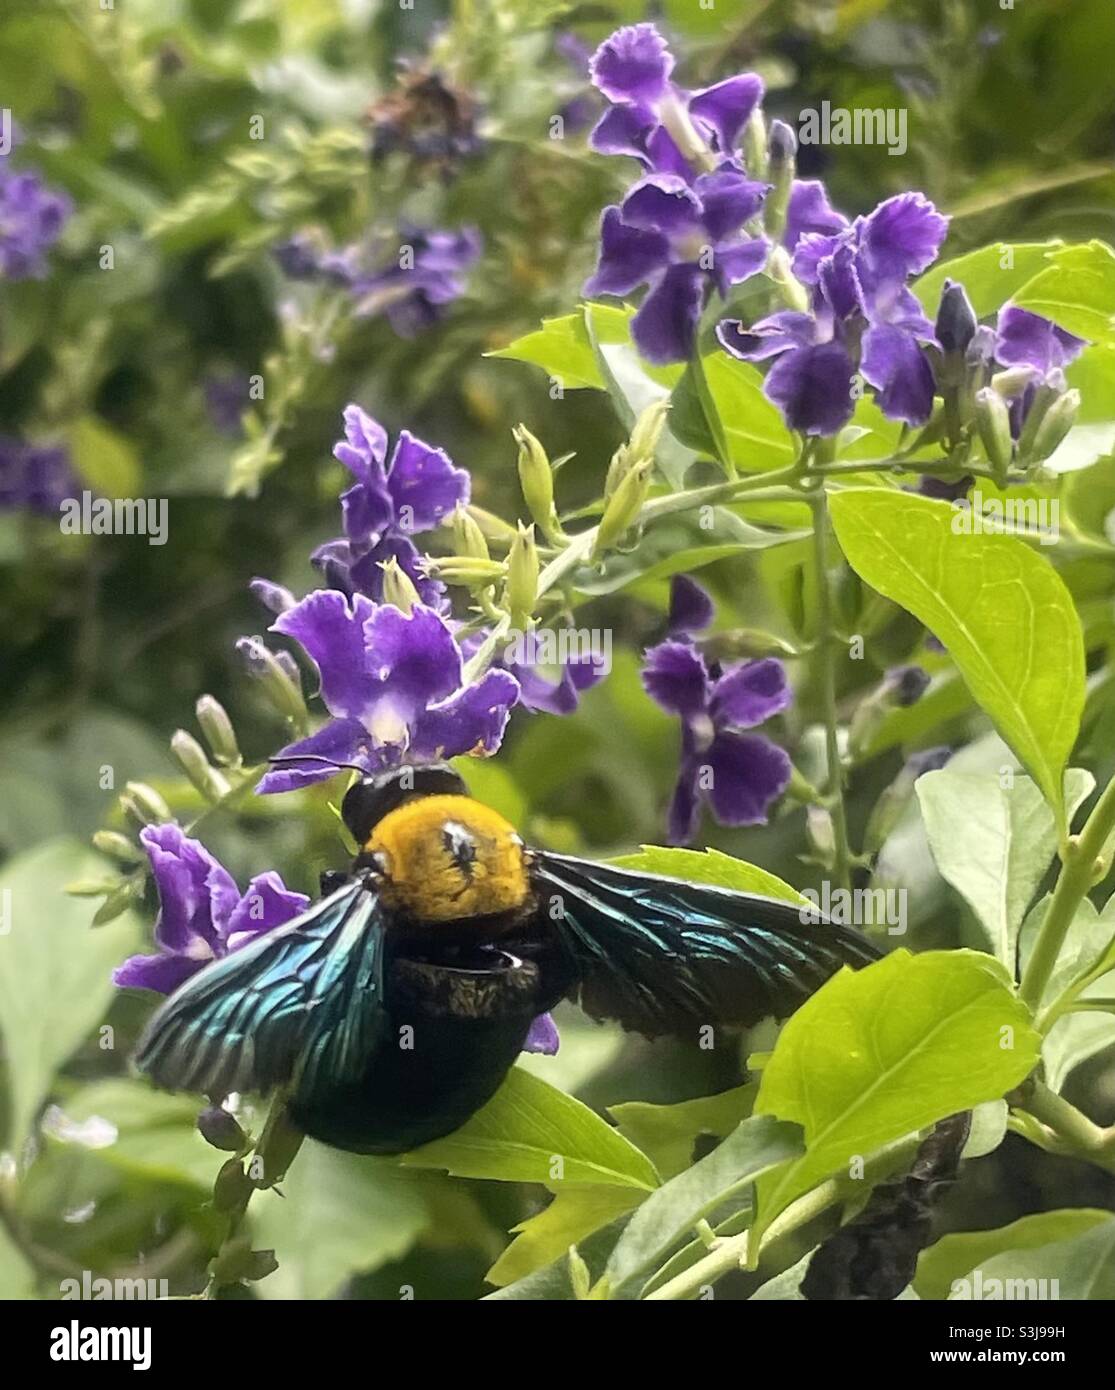 Apart from butterflies, our flowers of Golden dewdrop attracted pollinators like Carpenter bees also. Stock Photo